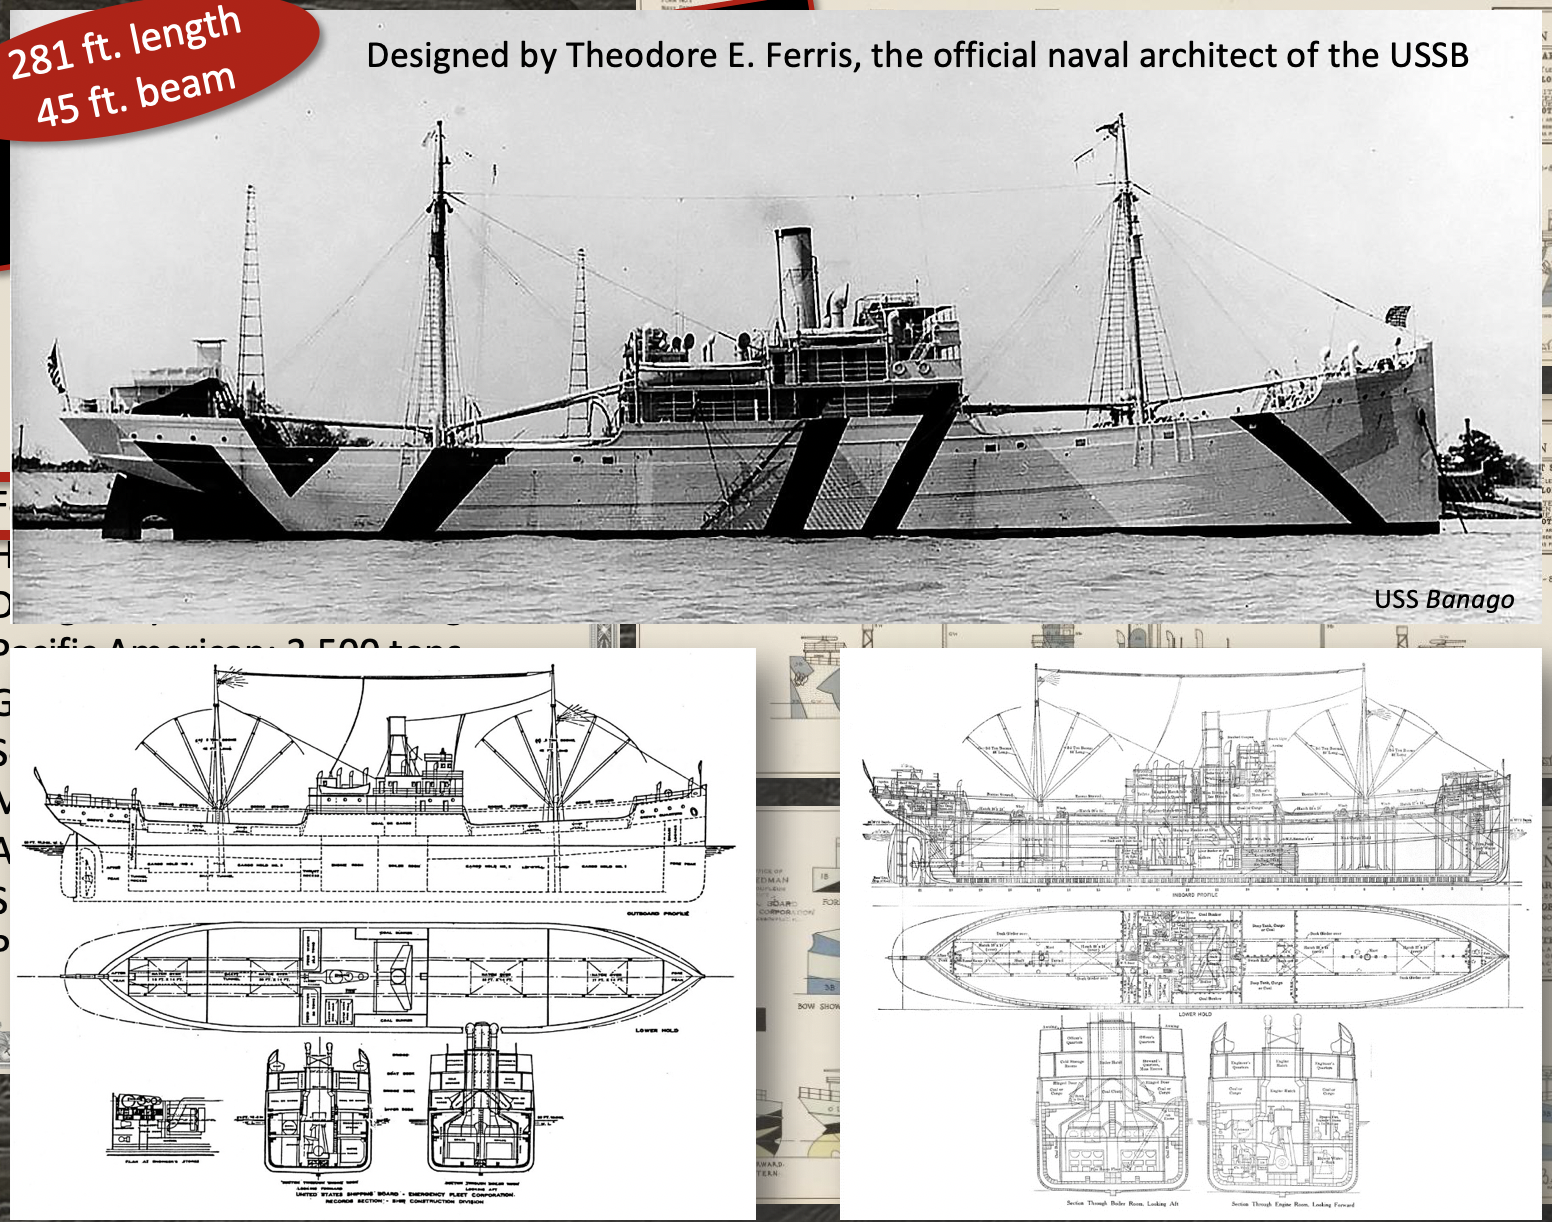 Sketch drawings of the ships